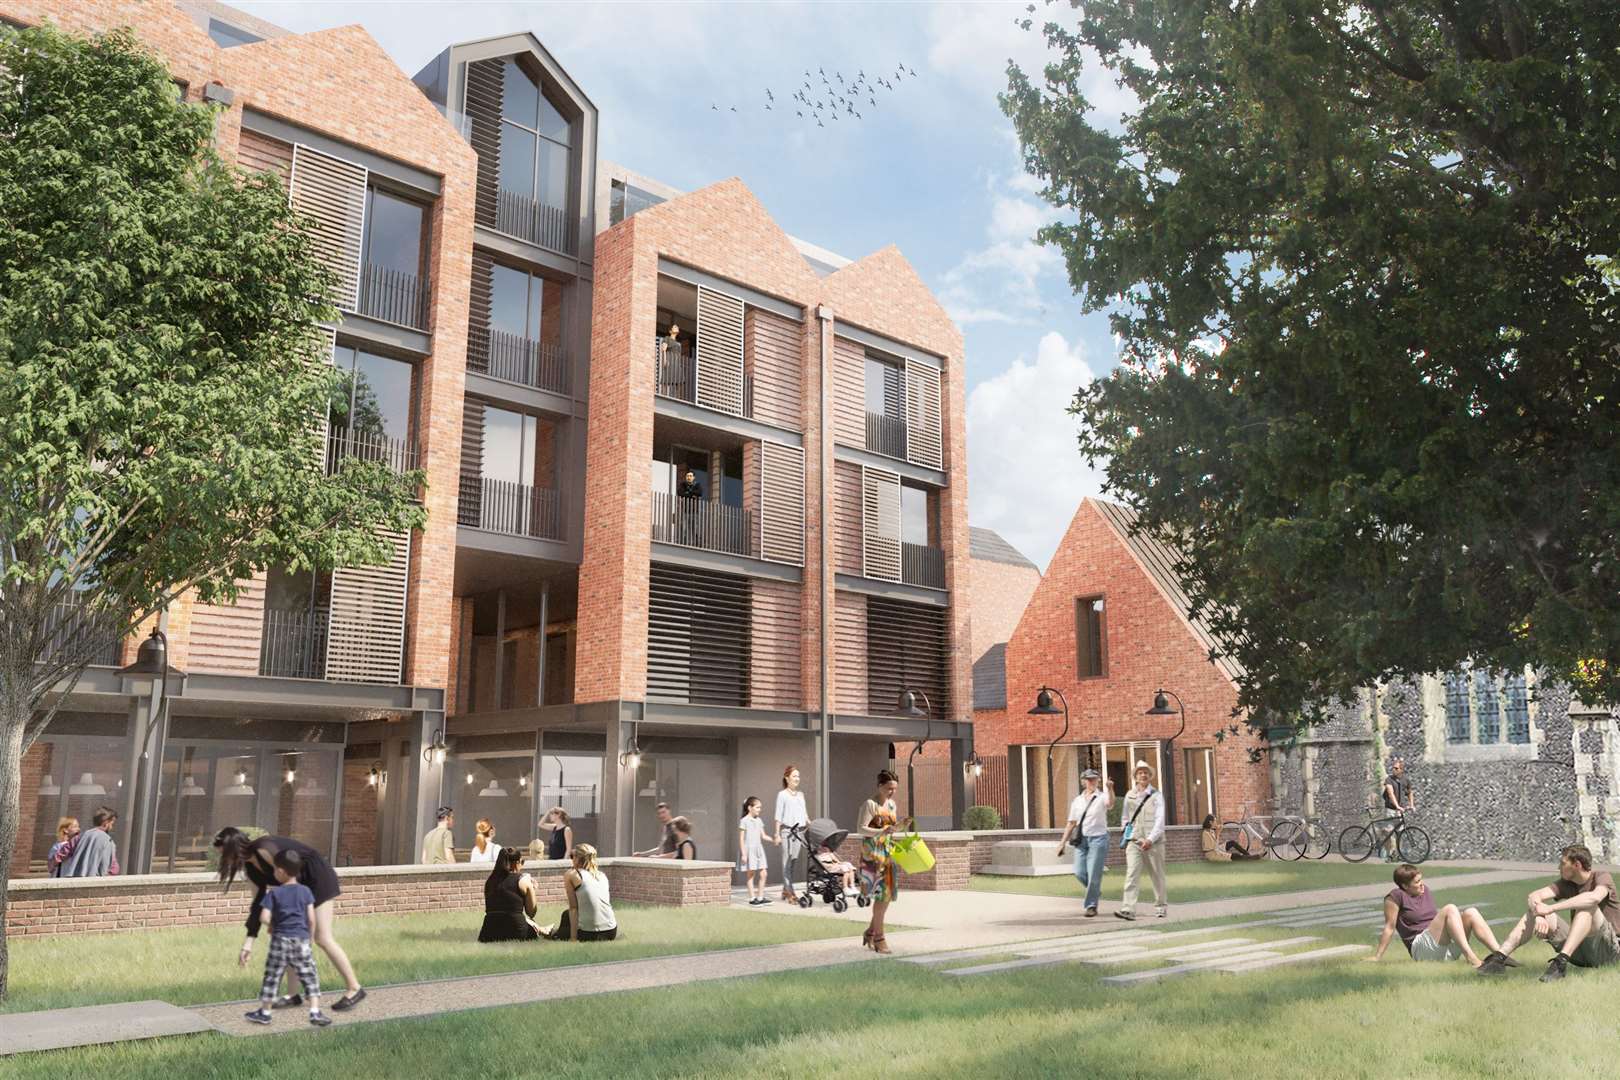 How the former Nasons site in Canterbury will eventually look